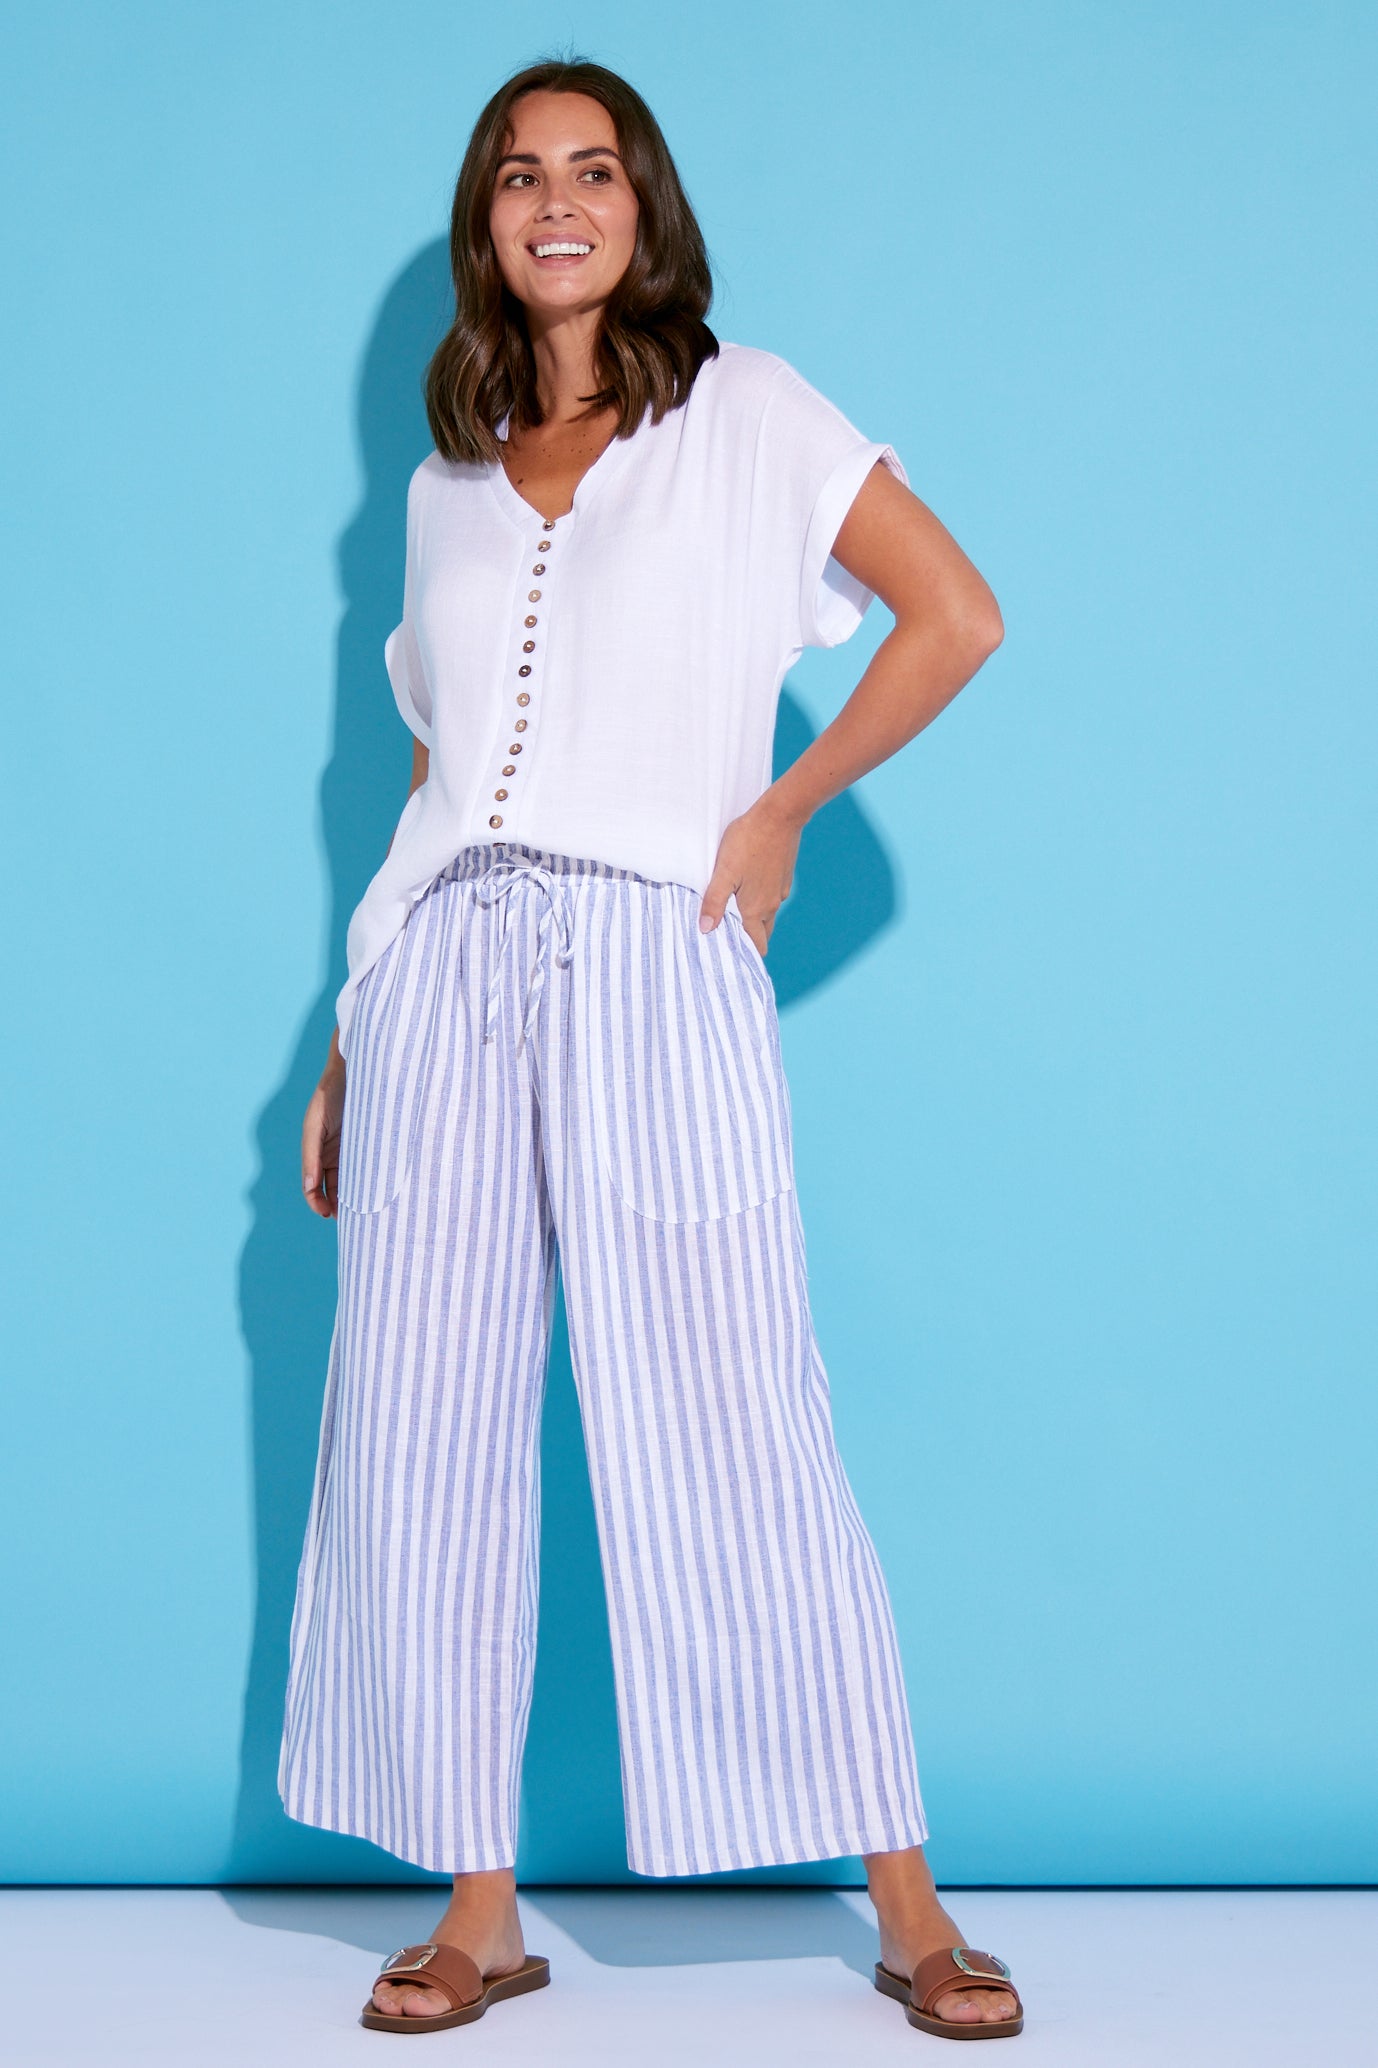 Striped Linen Trousers for Women, Blue & White Stripy Patterned